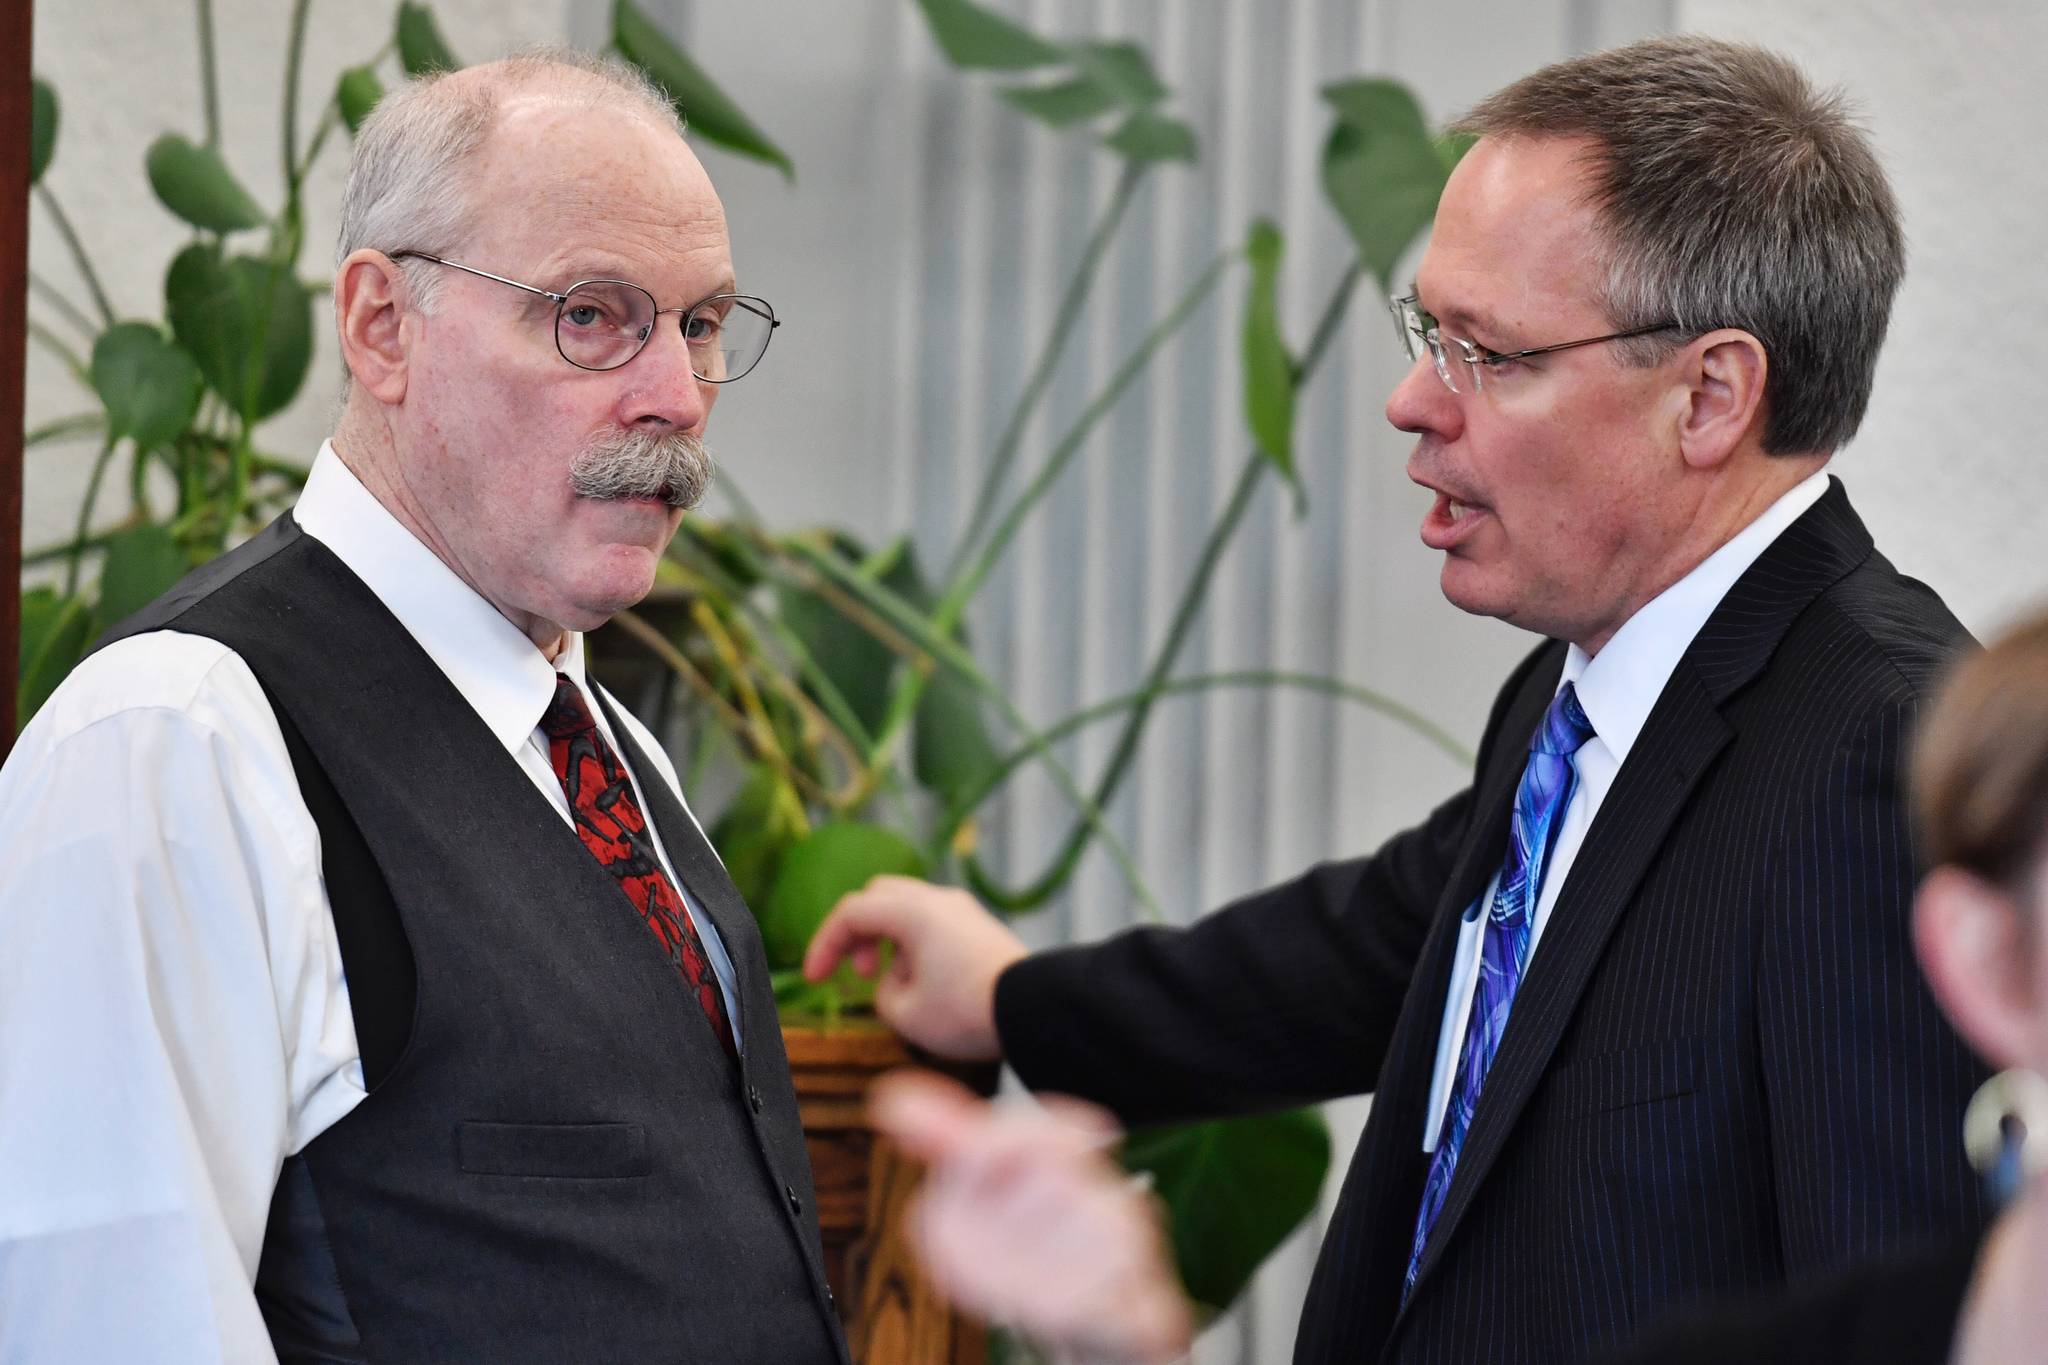 Bruce Tangeman, Commissioner of Revenue, right, speaks with Sen. Bert Stedman, R-Sita, Co-Chair of the Senate Finance Committee, before their committee meeting at the Capitol on Thursday, Feb. 28, 2019. (Michael Penn | Juneau Empire)